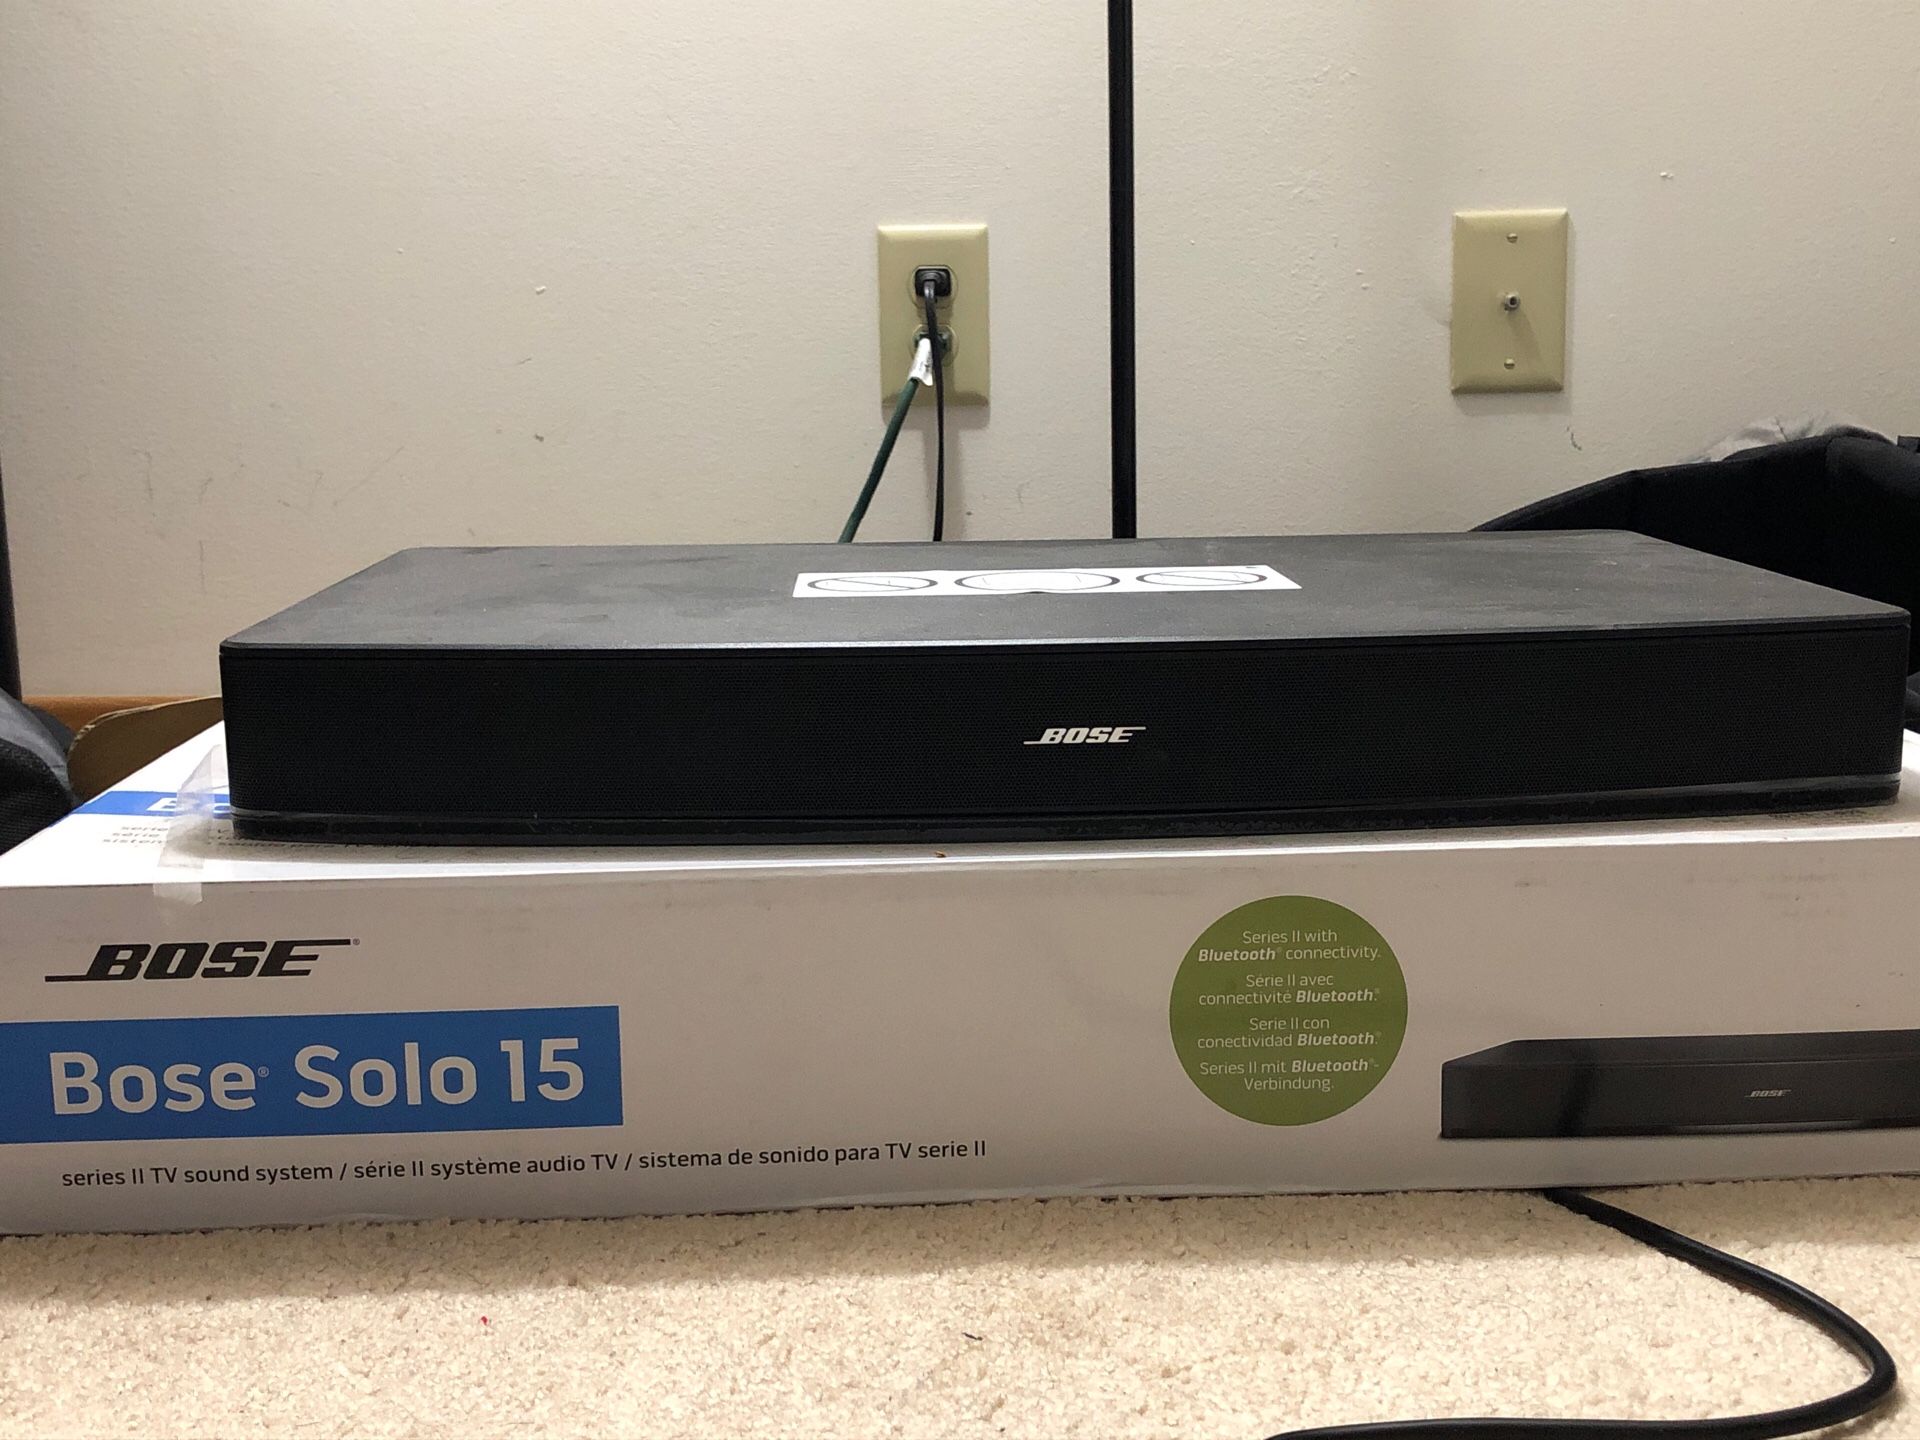 BOSE solo 15 series || tv sound system